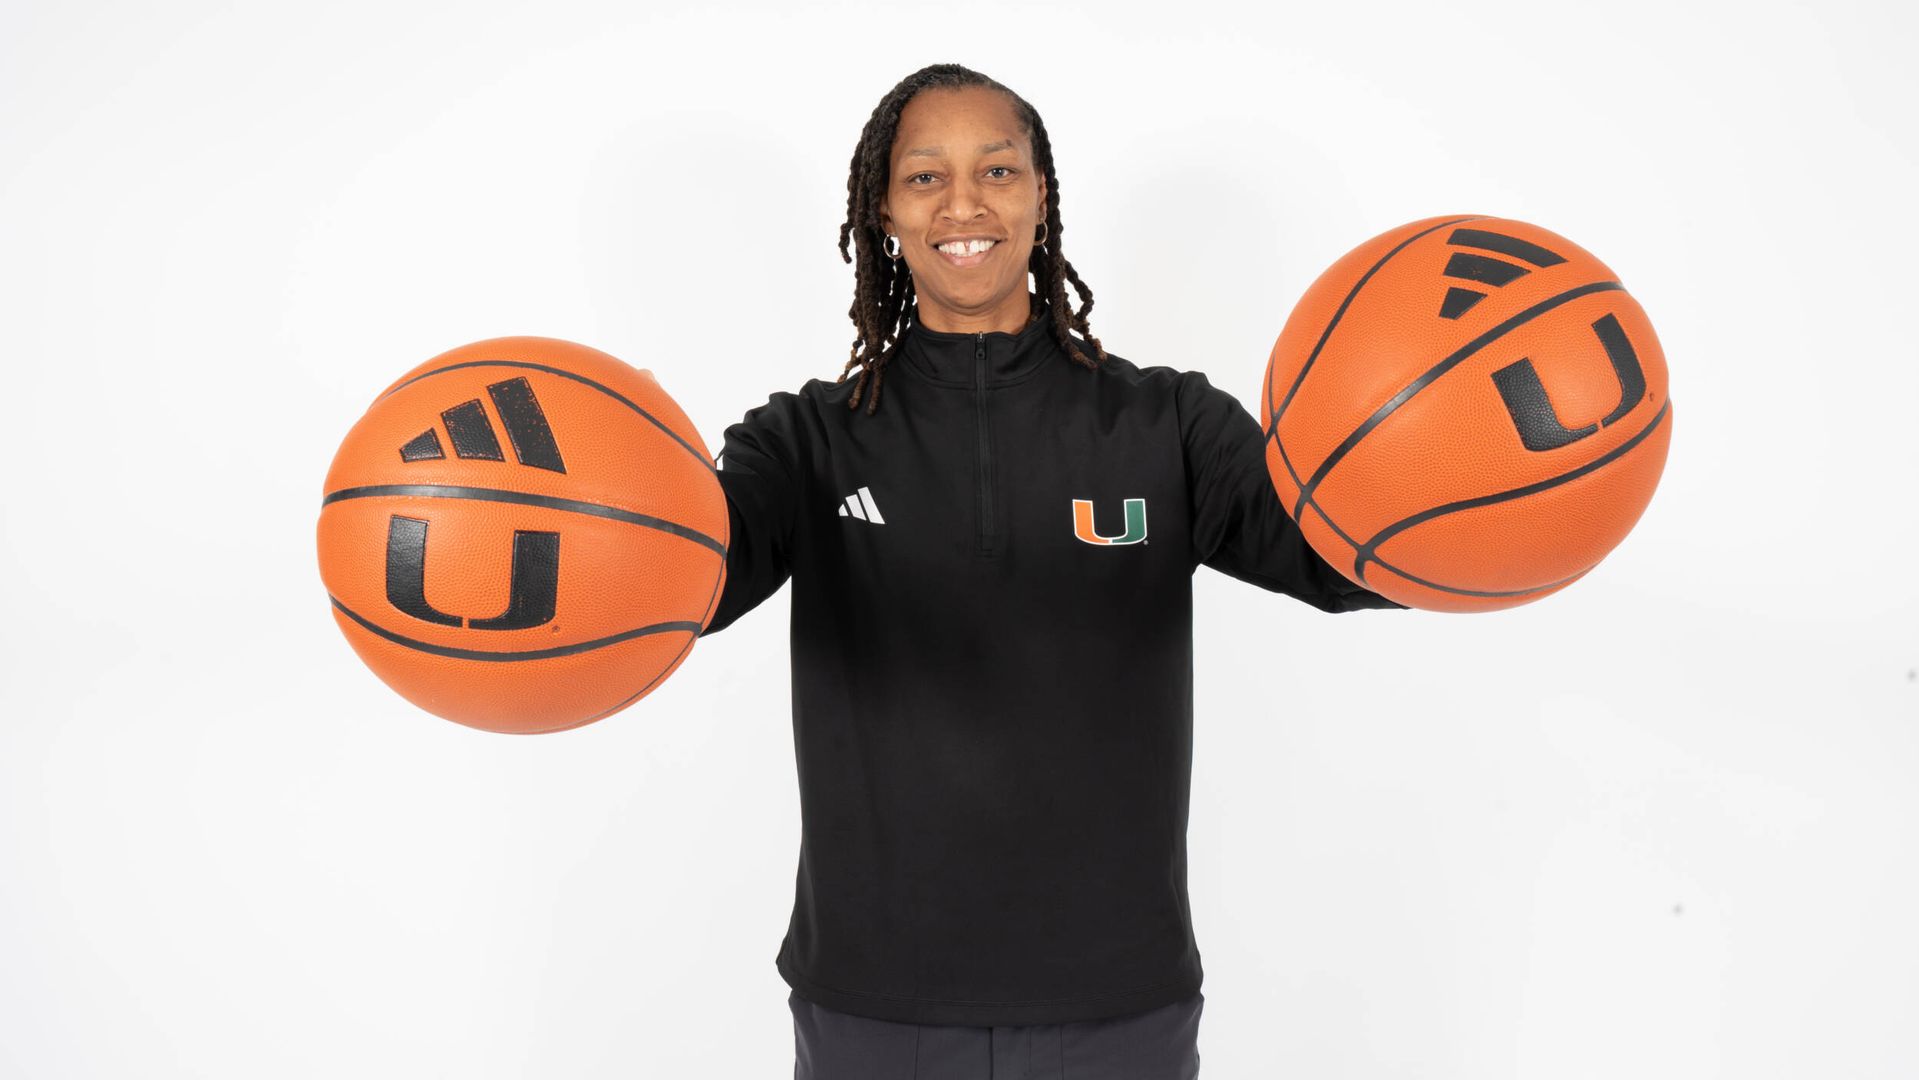 Murriel Page Joins Miami as Assistant Coach